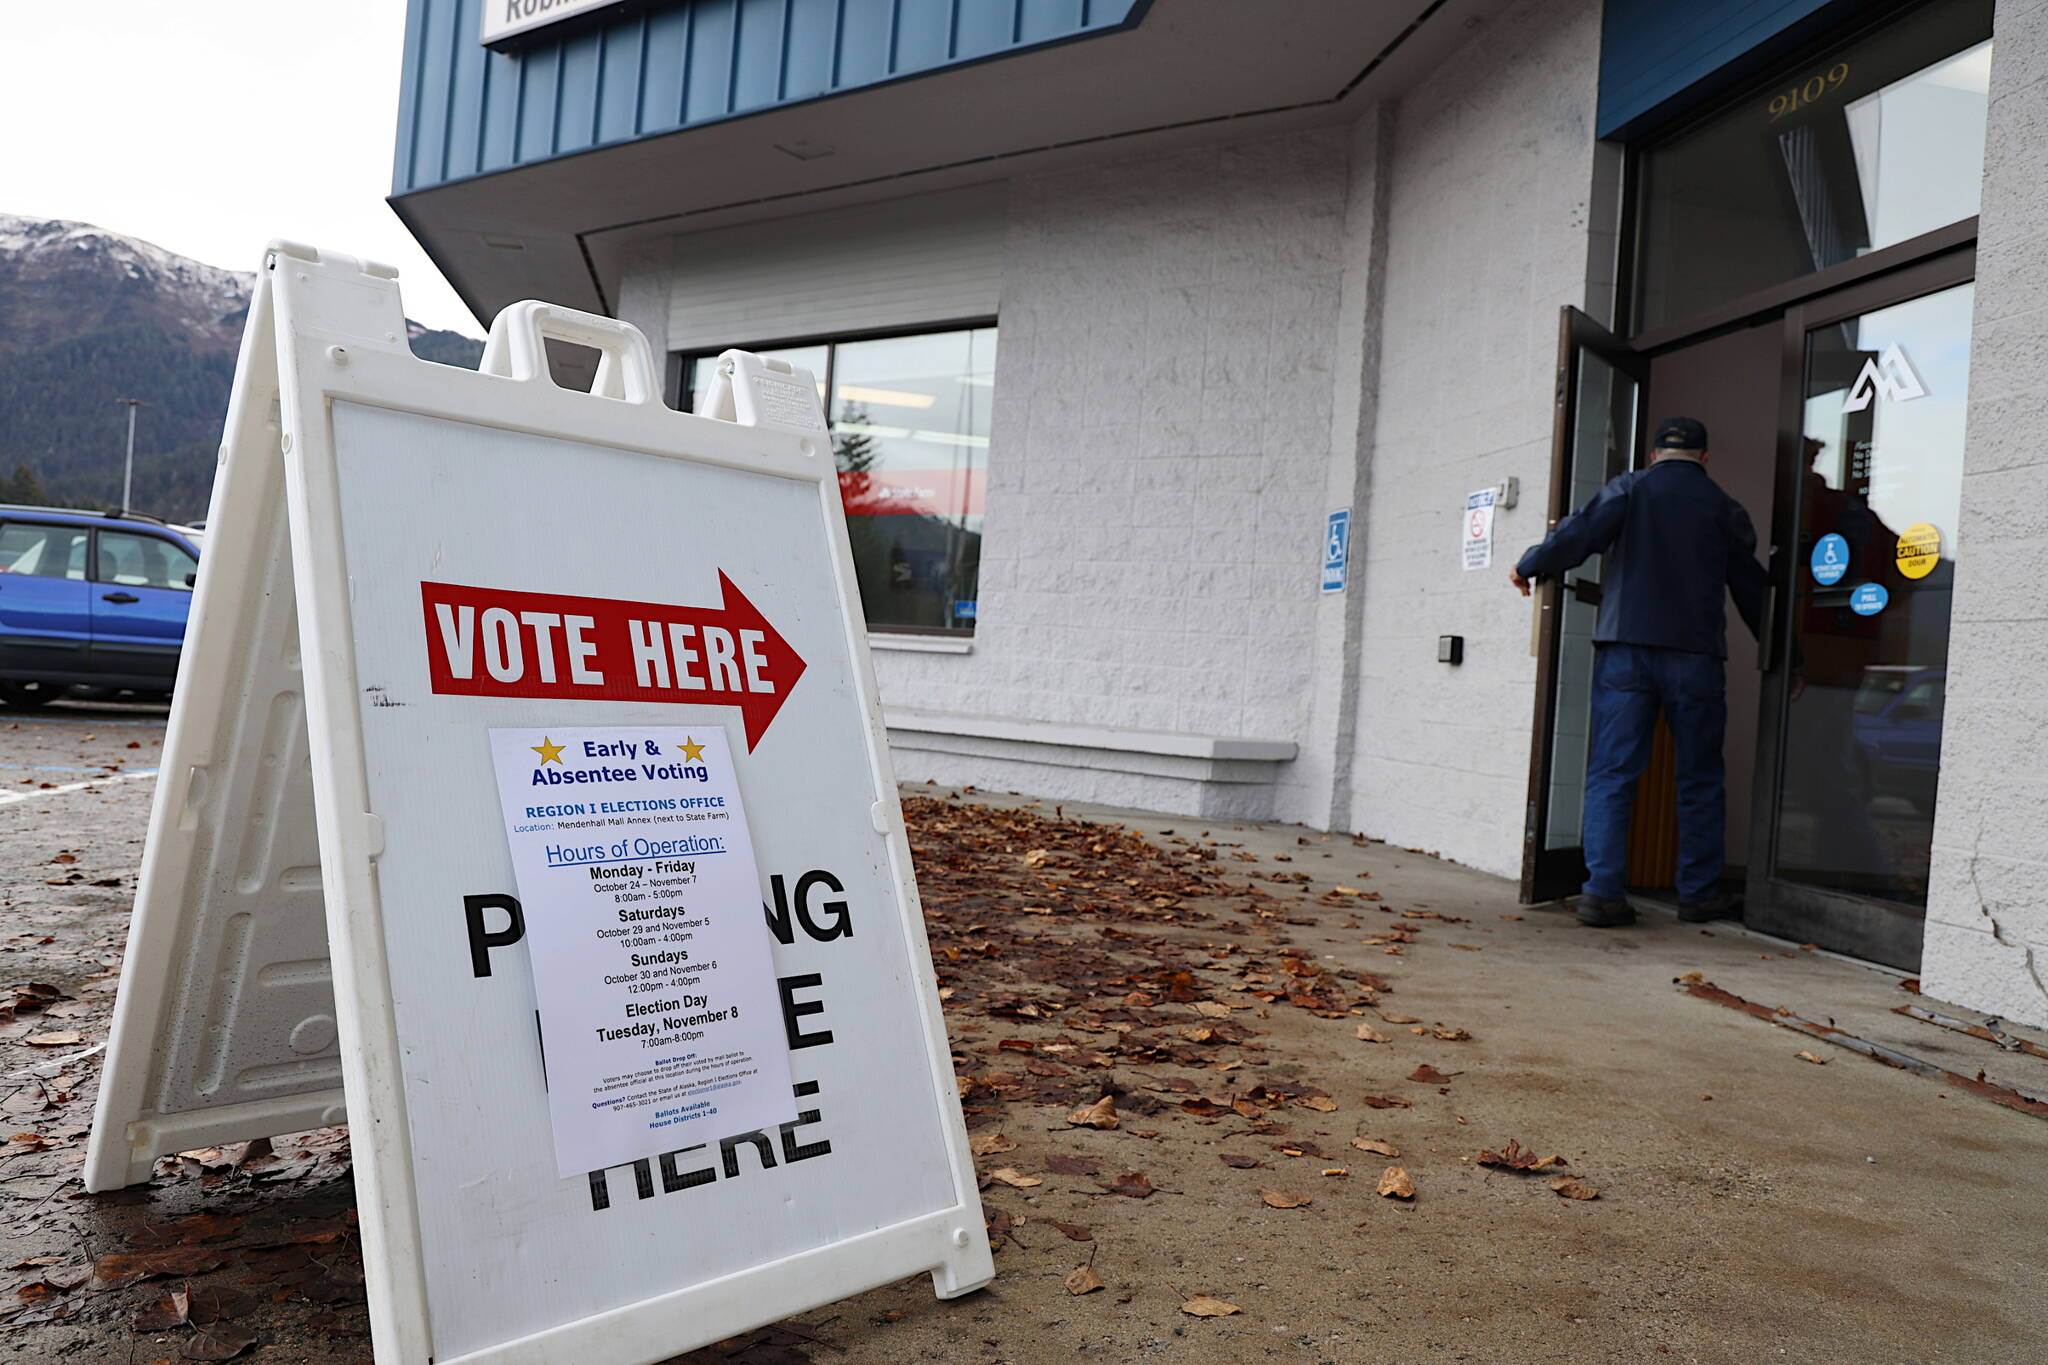 A person enters the Division of Election’s office at the Mendenhall Mall, where early voting is taking place from 8 a.m. to 5 p.m. weekdays through Nov. 8. (Clarise Larson / Juneau Empire)